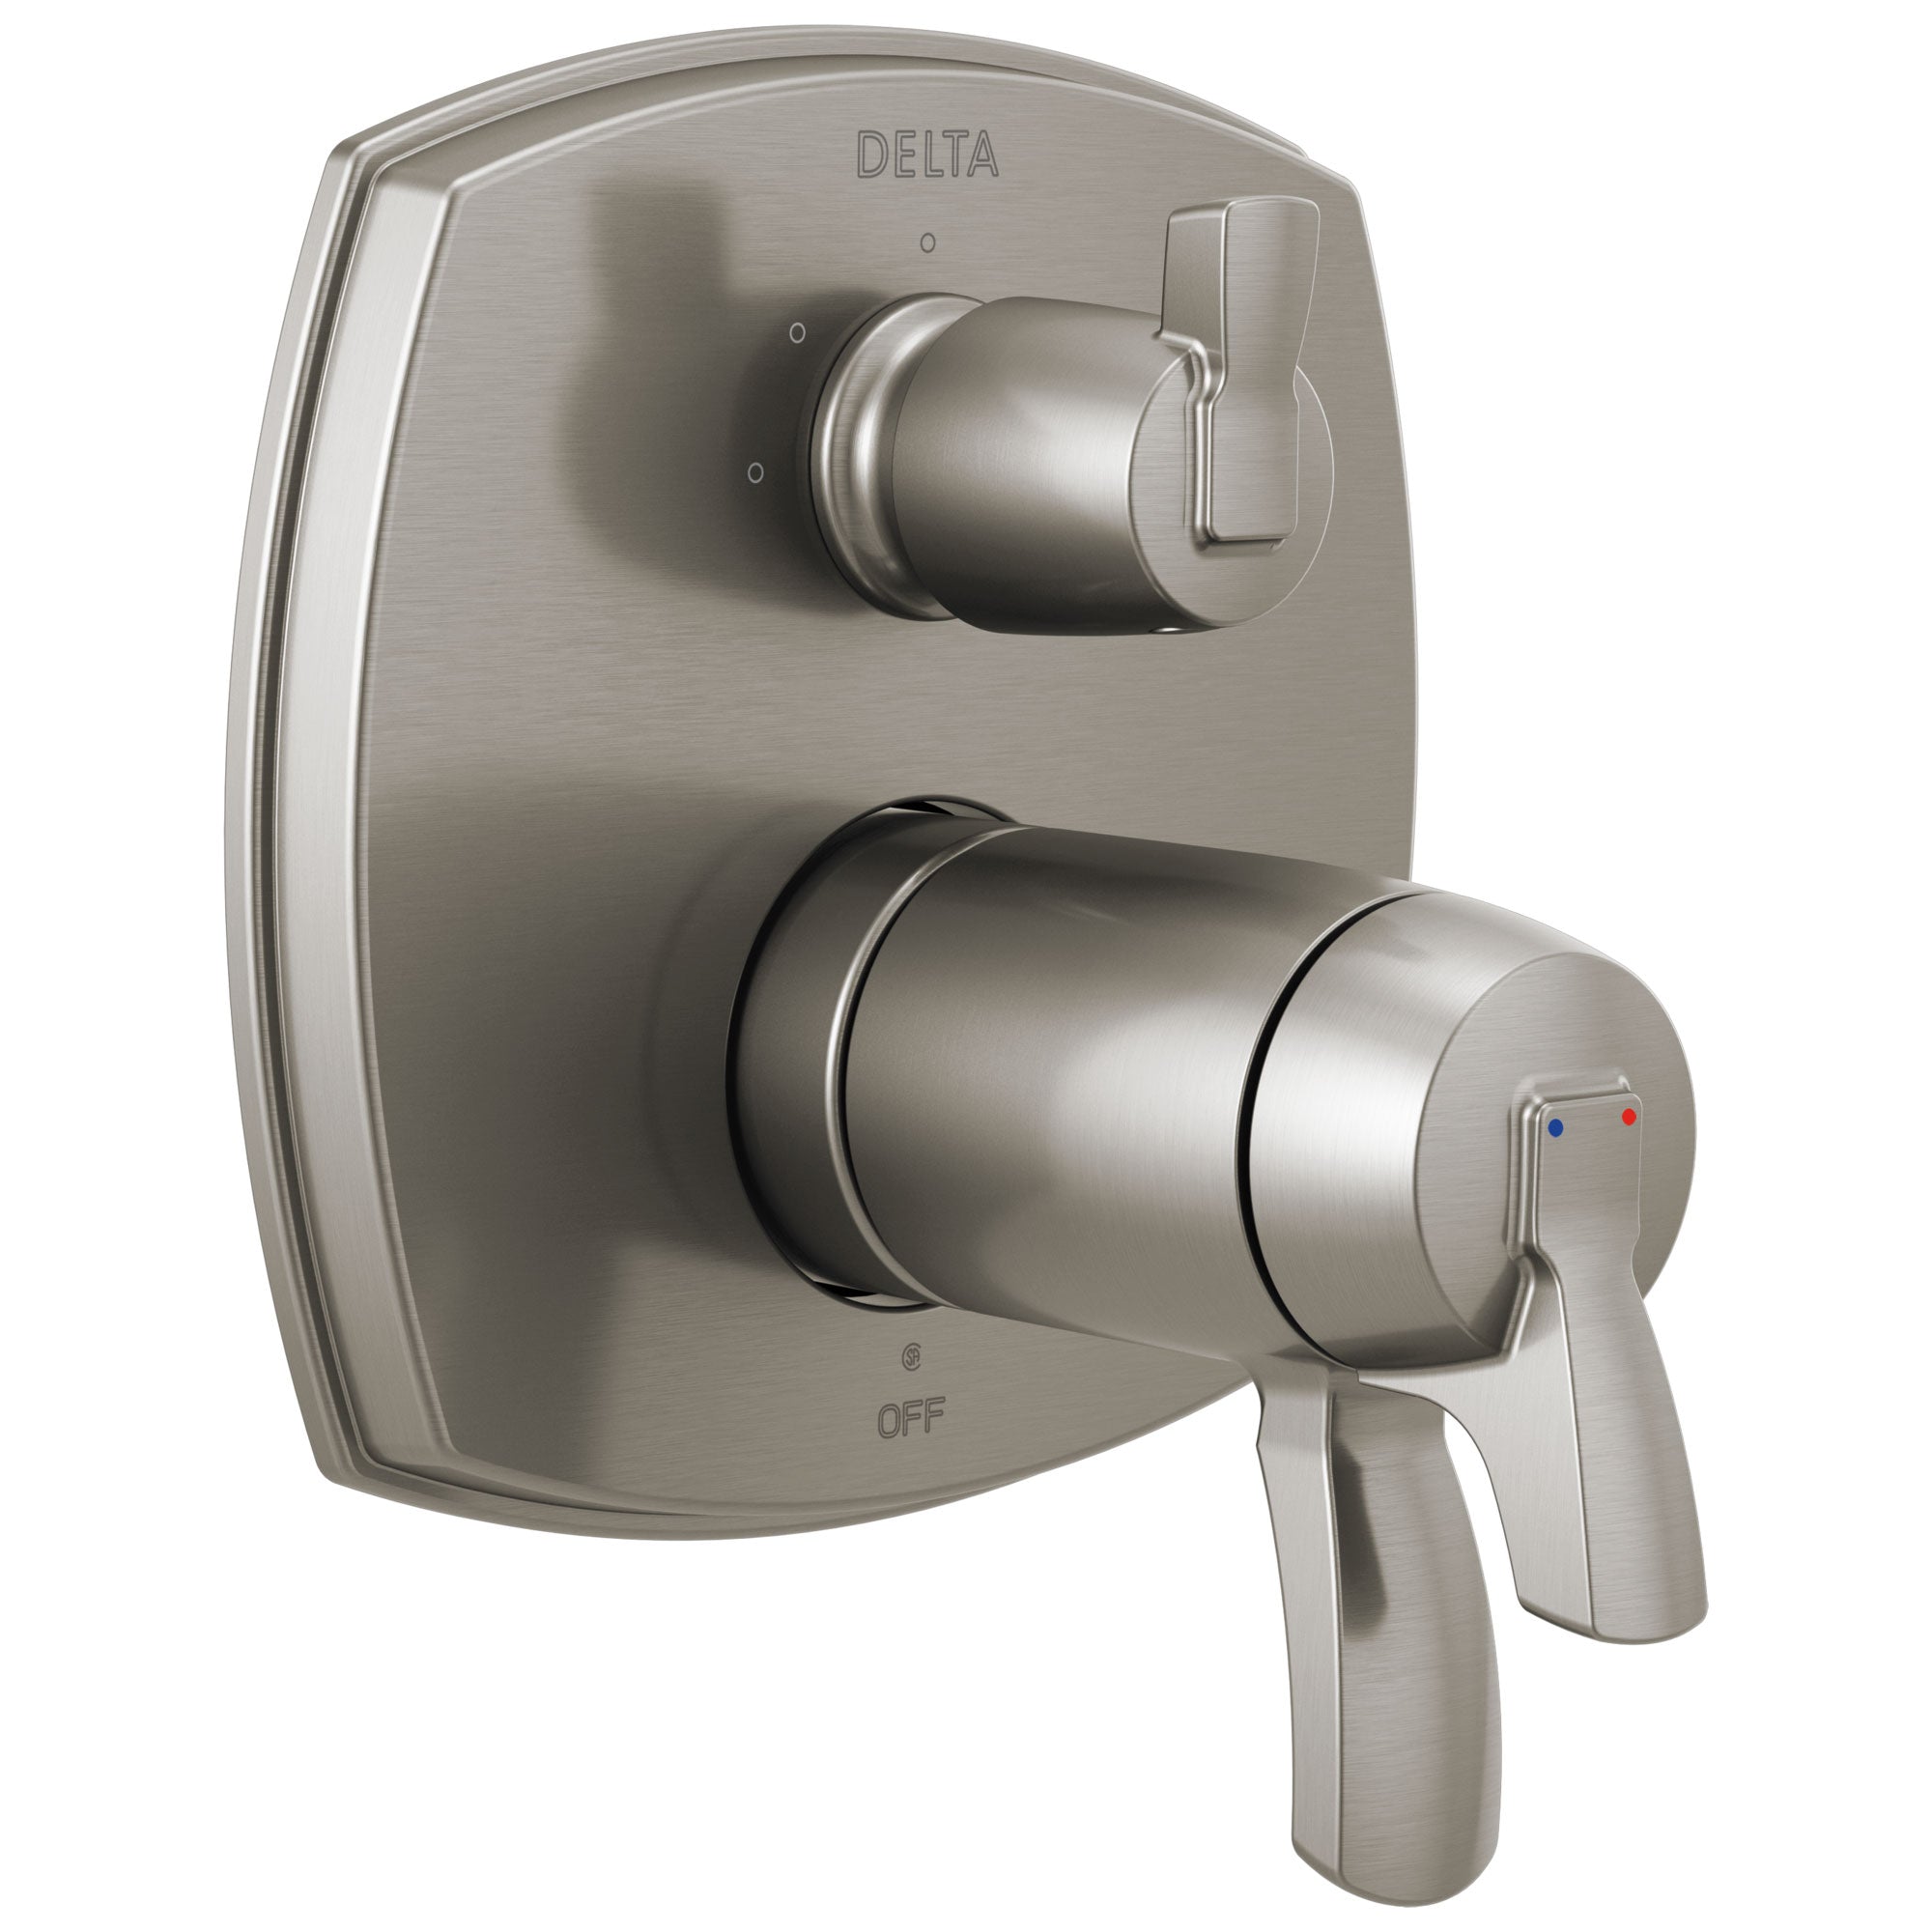 Delta Stryke Stainless Steel Finish 3-setting Integrated Lever Handle Diverter Thermostatic Shower System Control Includes Valve and Handles D3681V